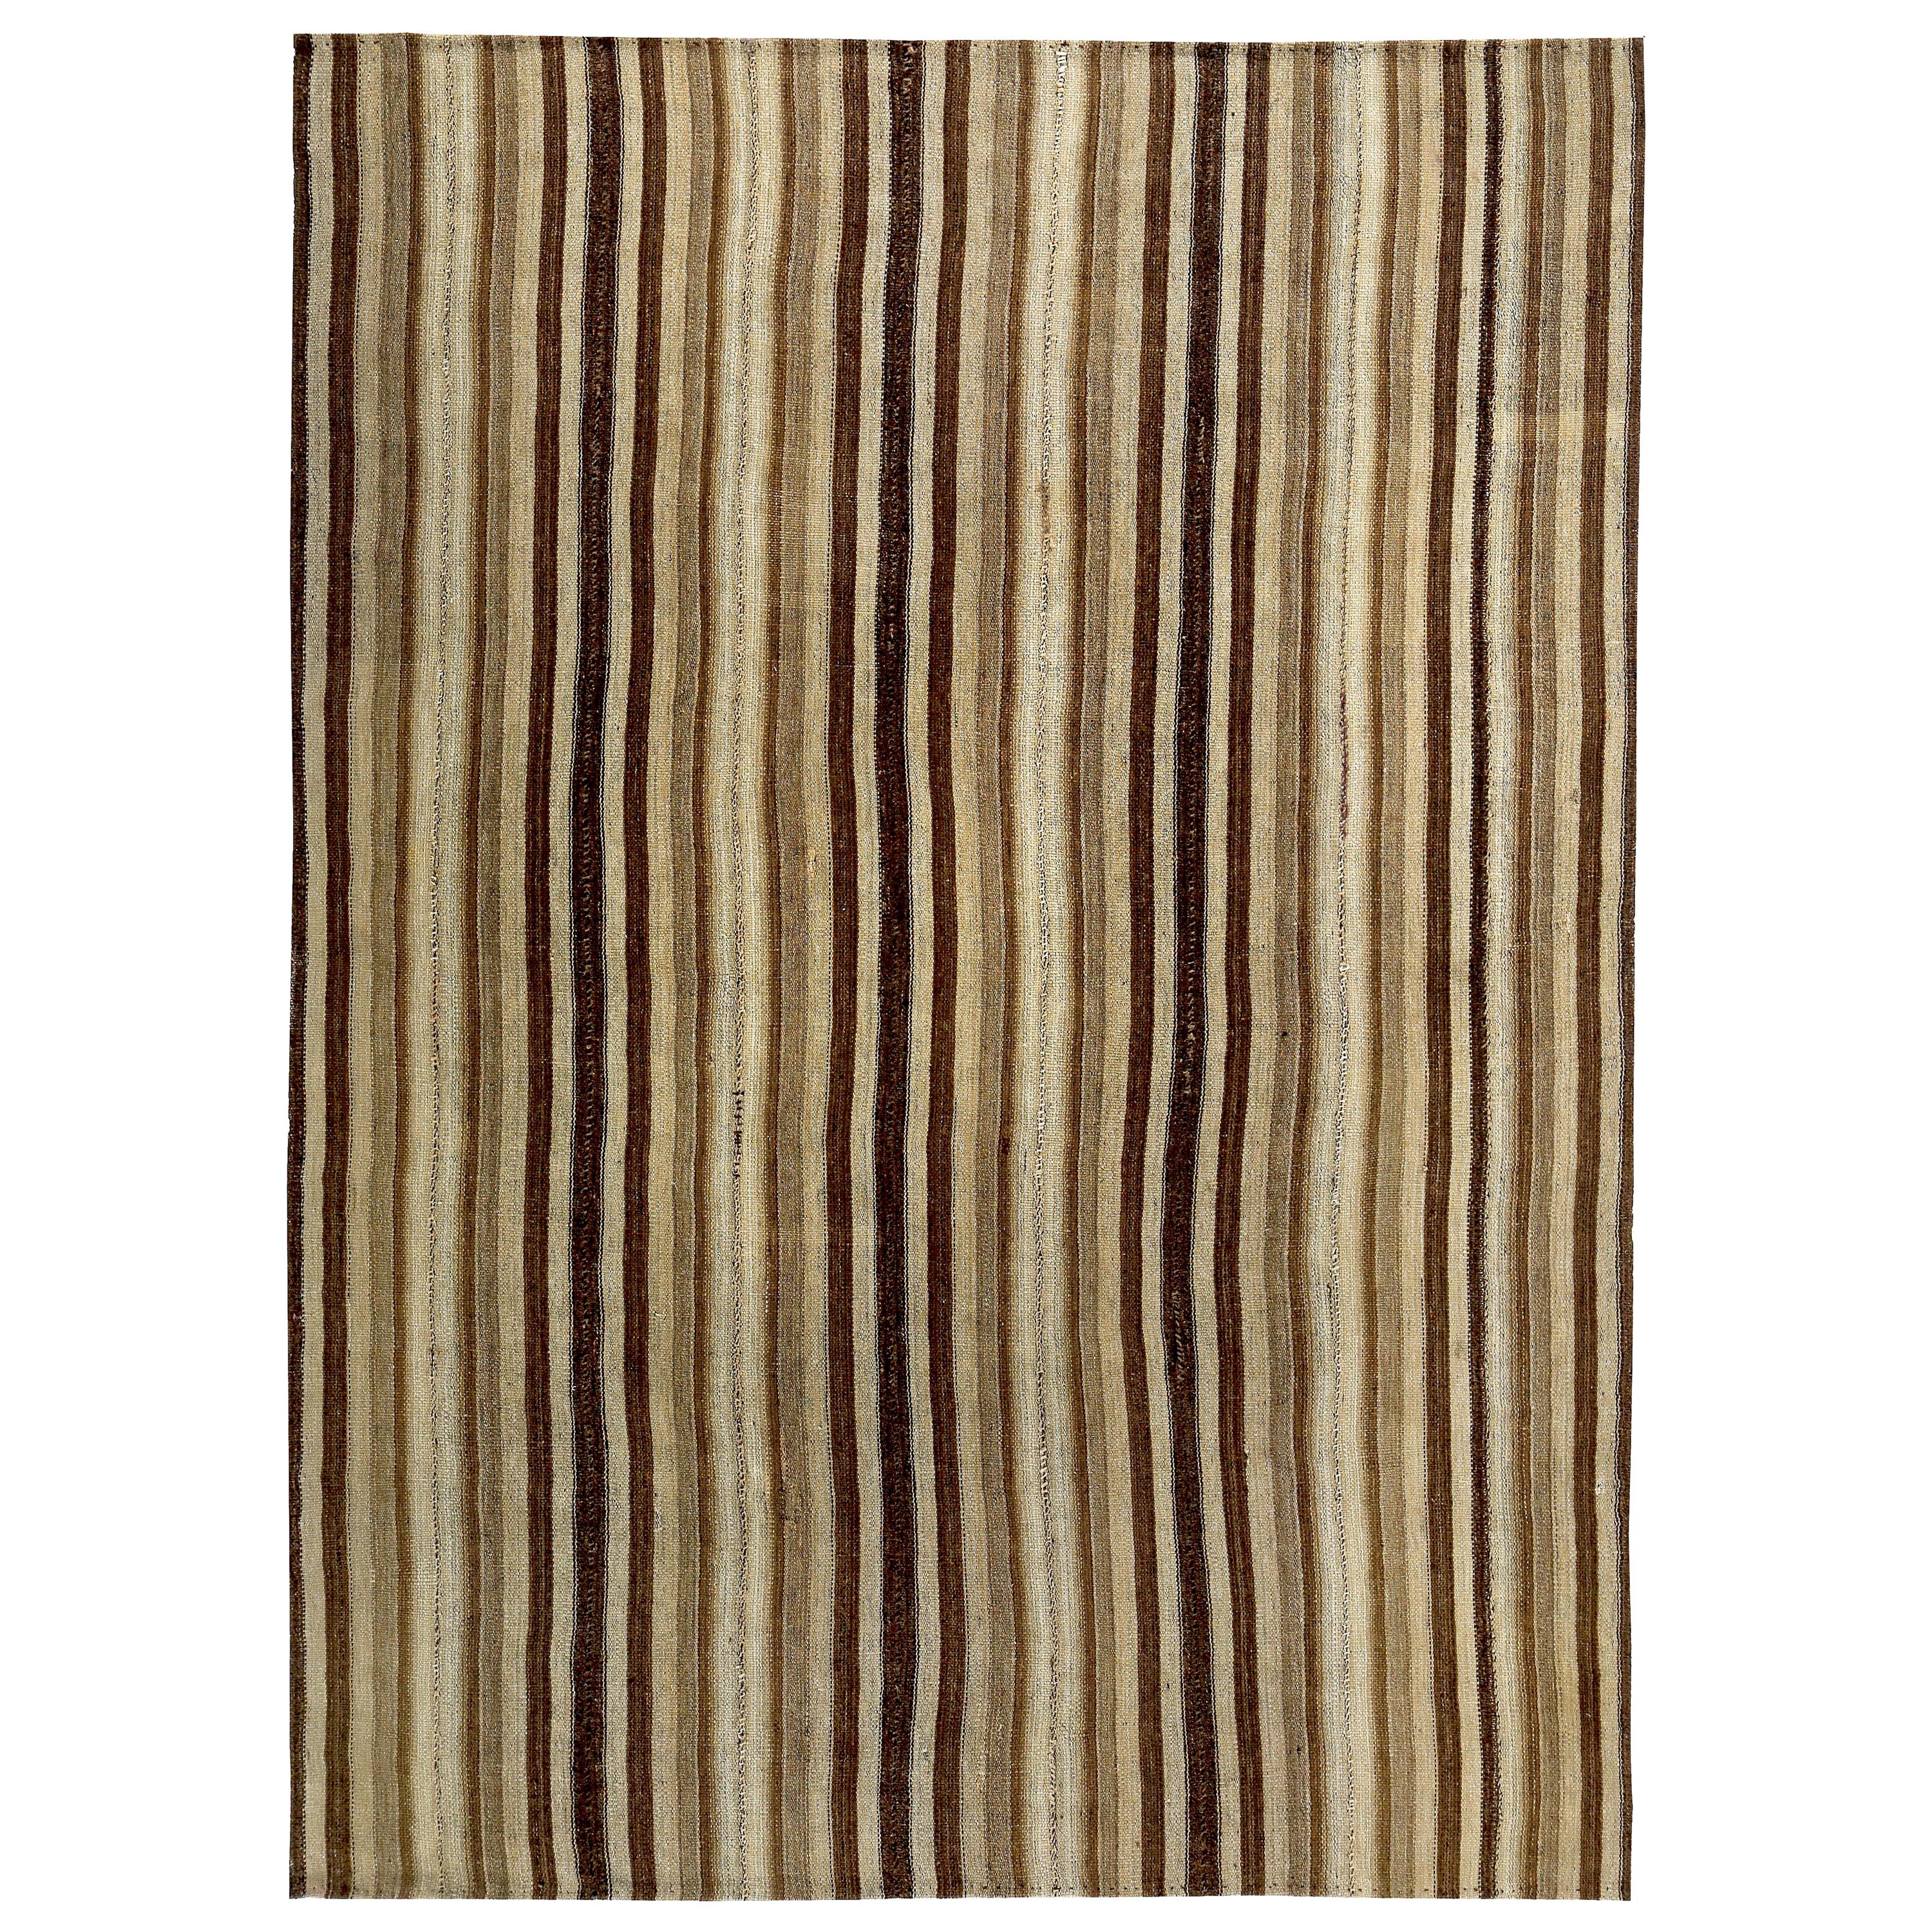 Contemporary Turkish Kilim Rug with Black and Brown Stripes on Beige Field